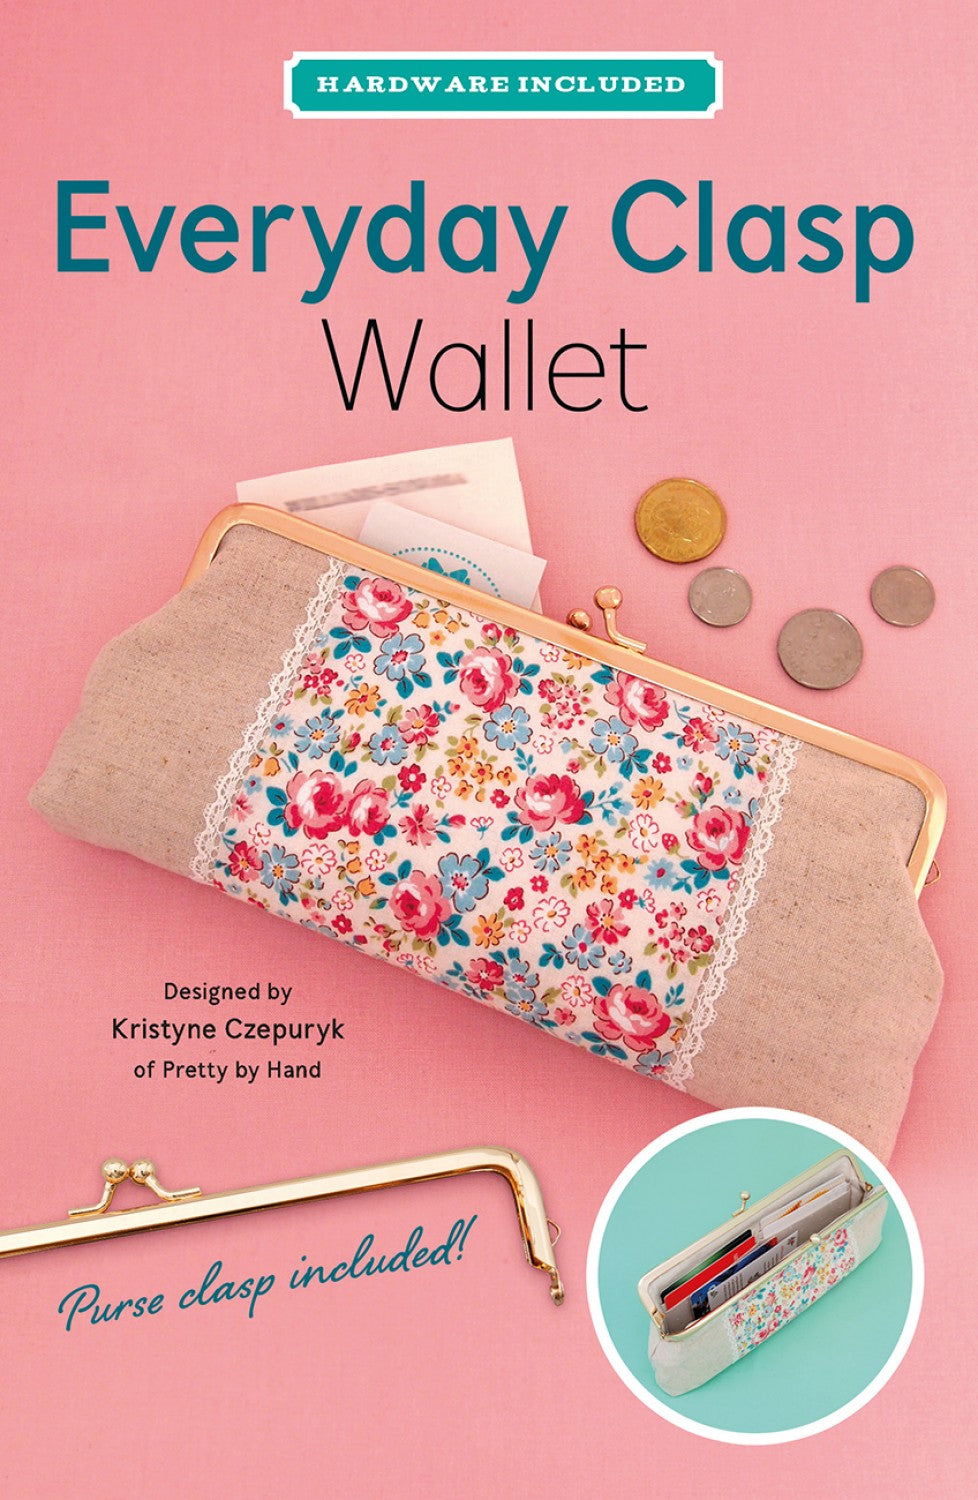 Everyday Clasp Wallet Pattern Including Hardware